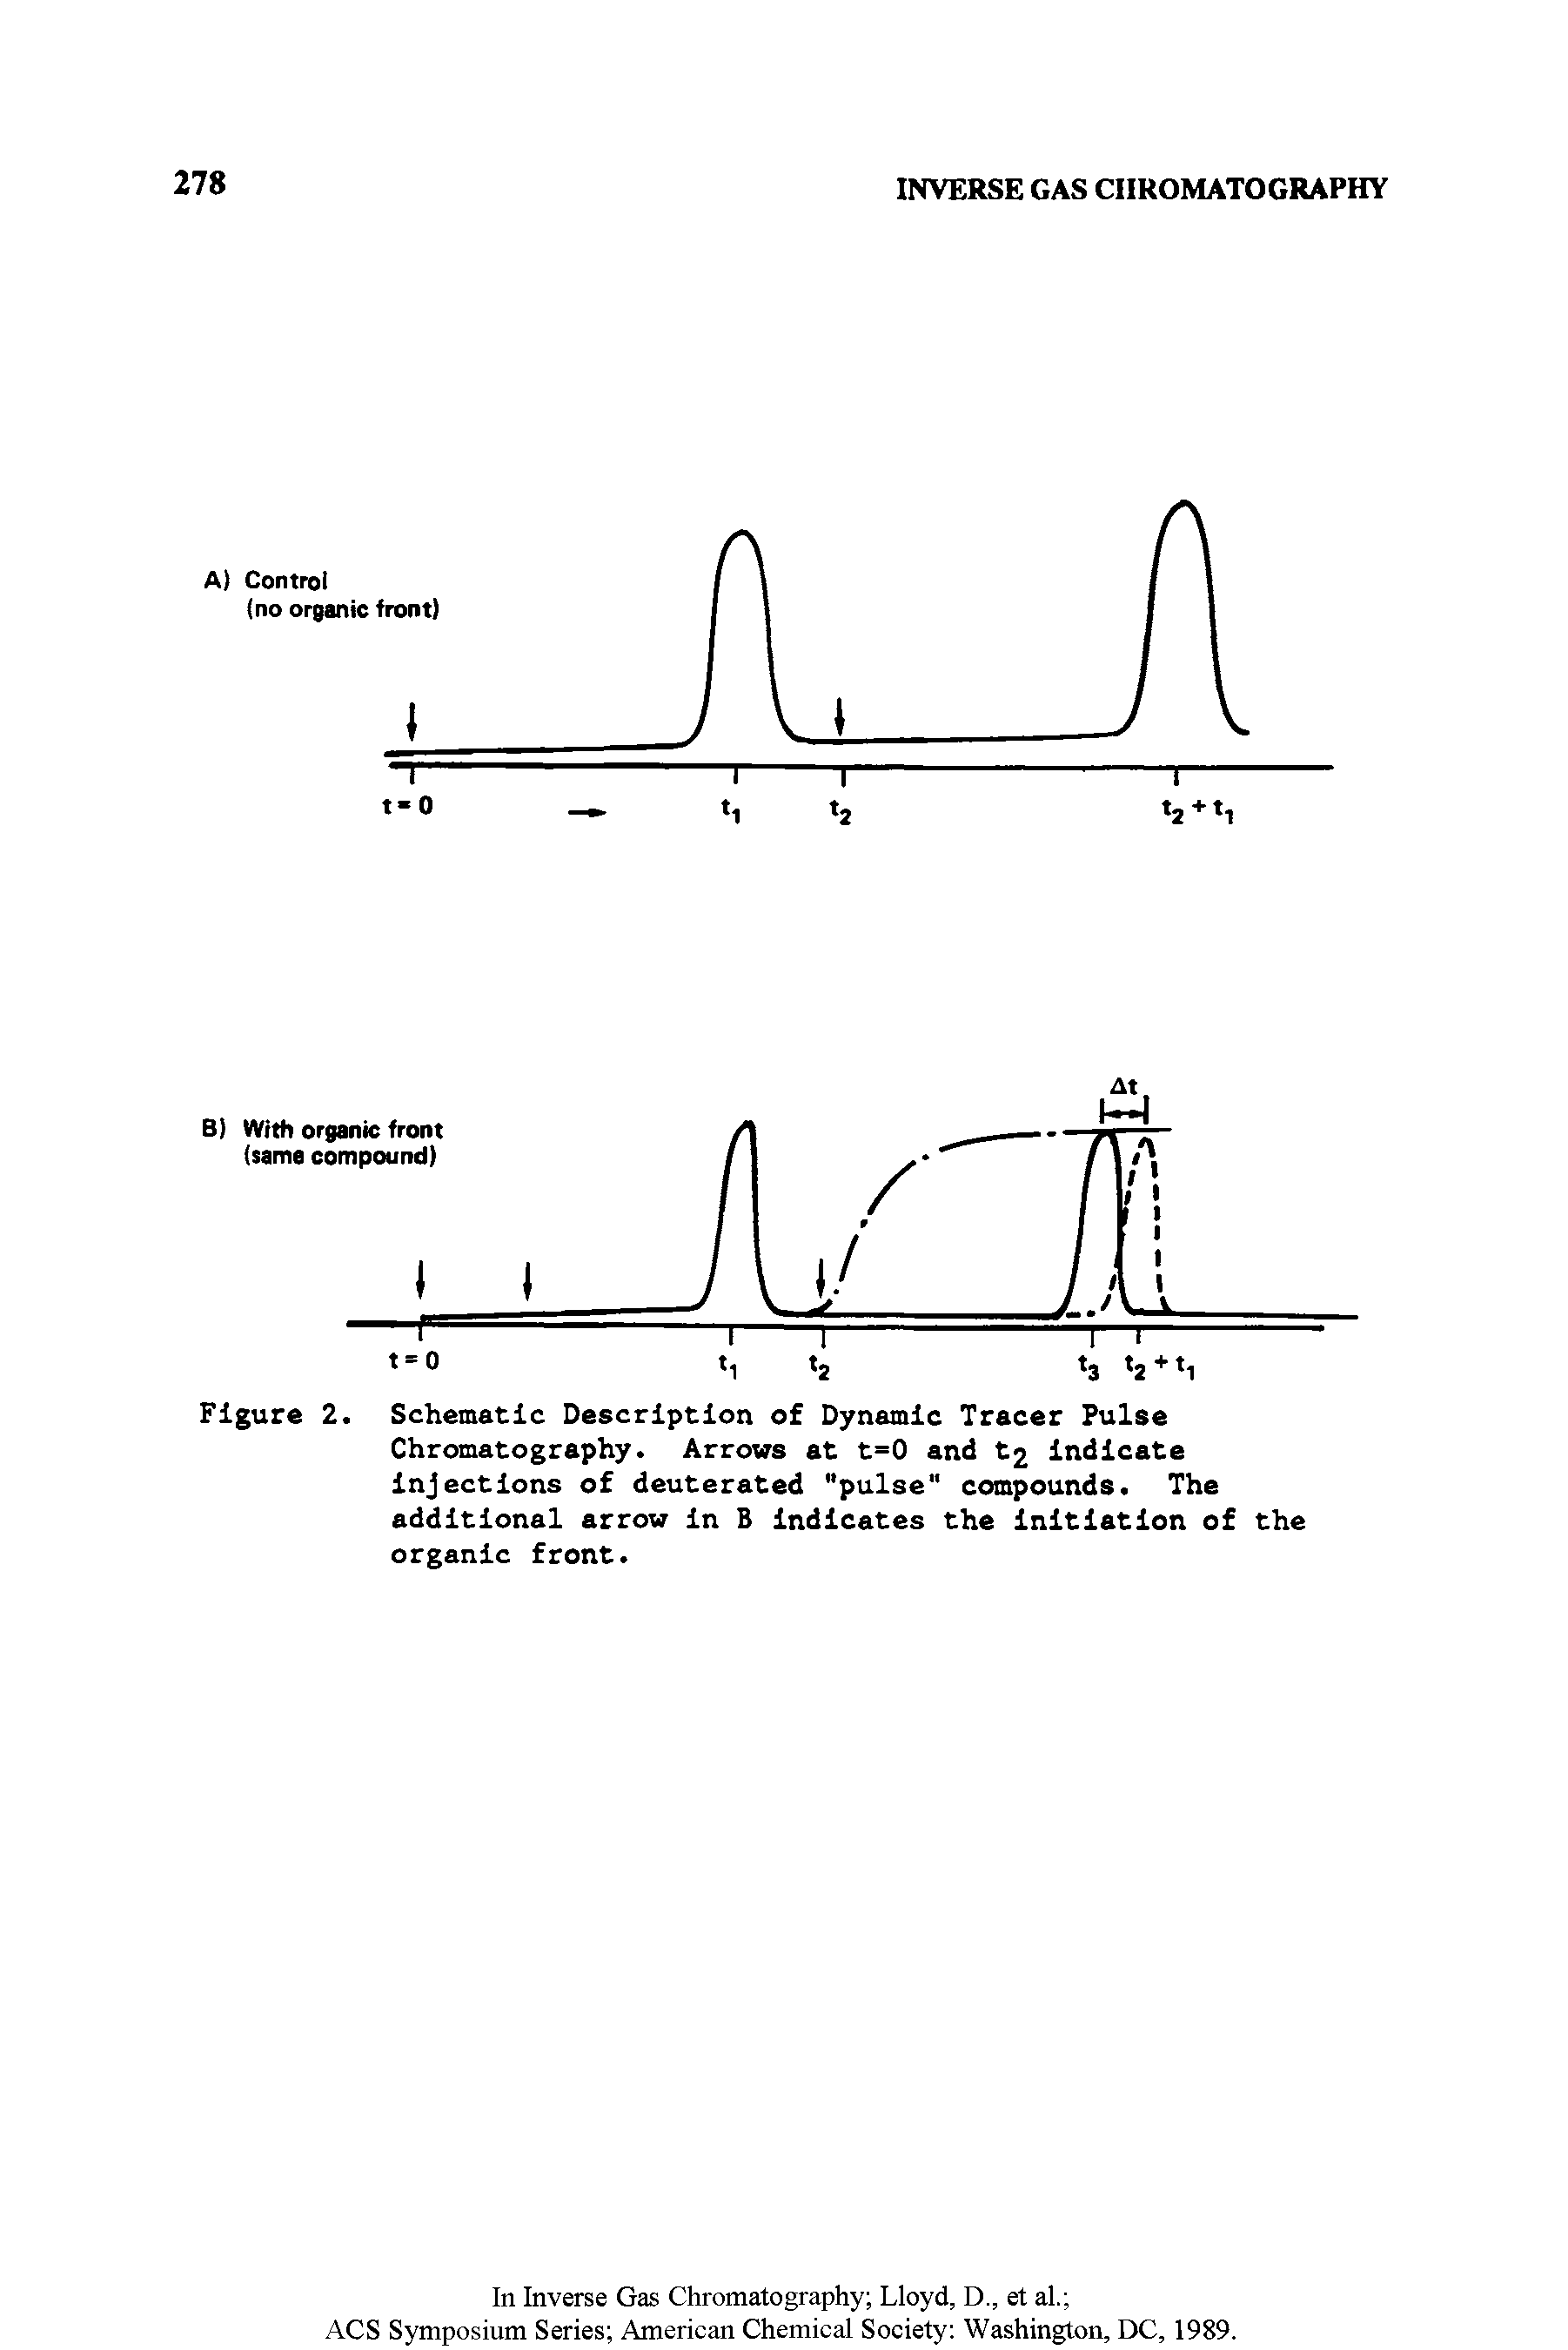 Figure 2. Schematic Description of Dynamic Tracer Pulse Chromatography. Arrows at t=0 and t2 indicate injections of deuterated "pulse" compounds. The additional arrow in B indicates the initiation of the organic front.